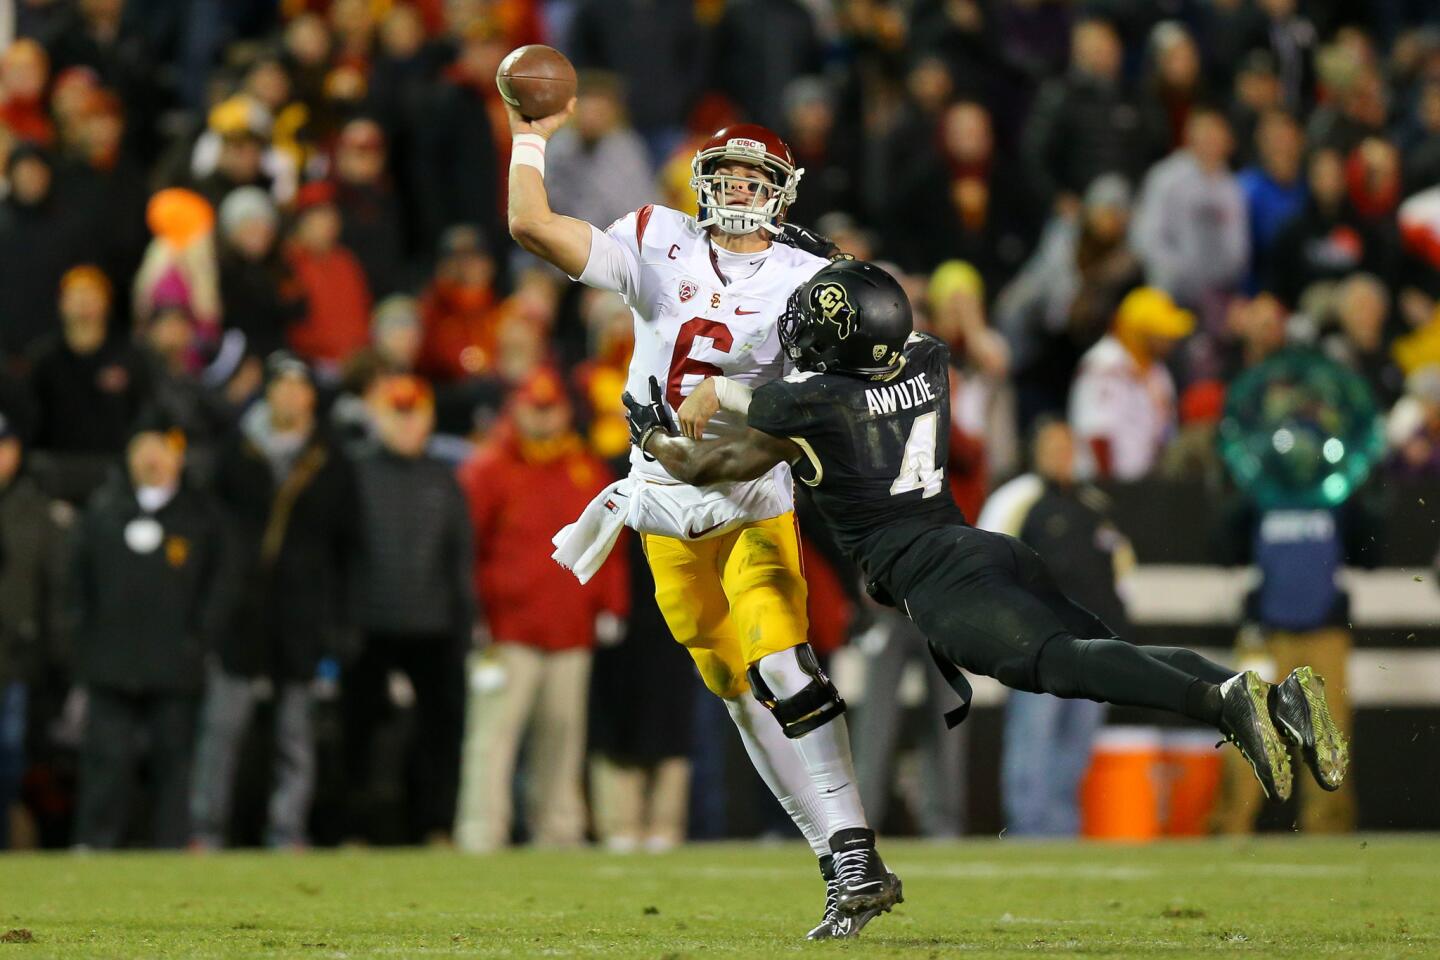 USC is still in the hunt for a division title in football